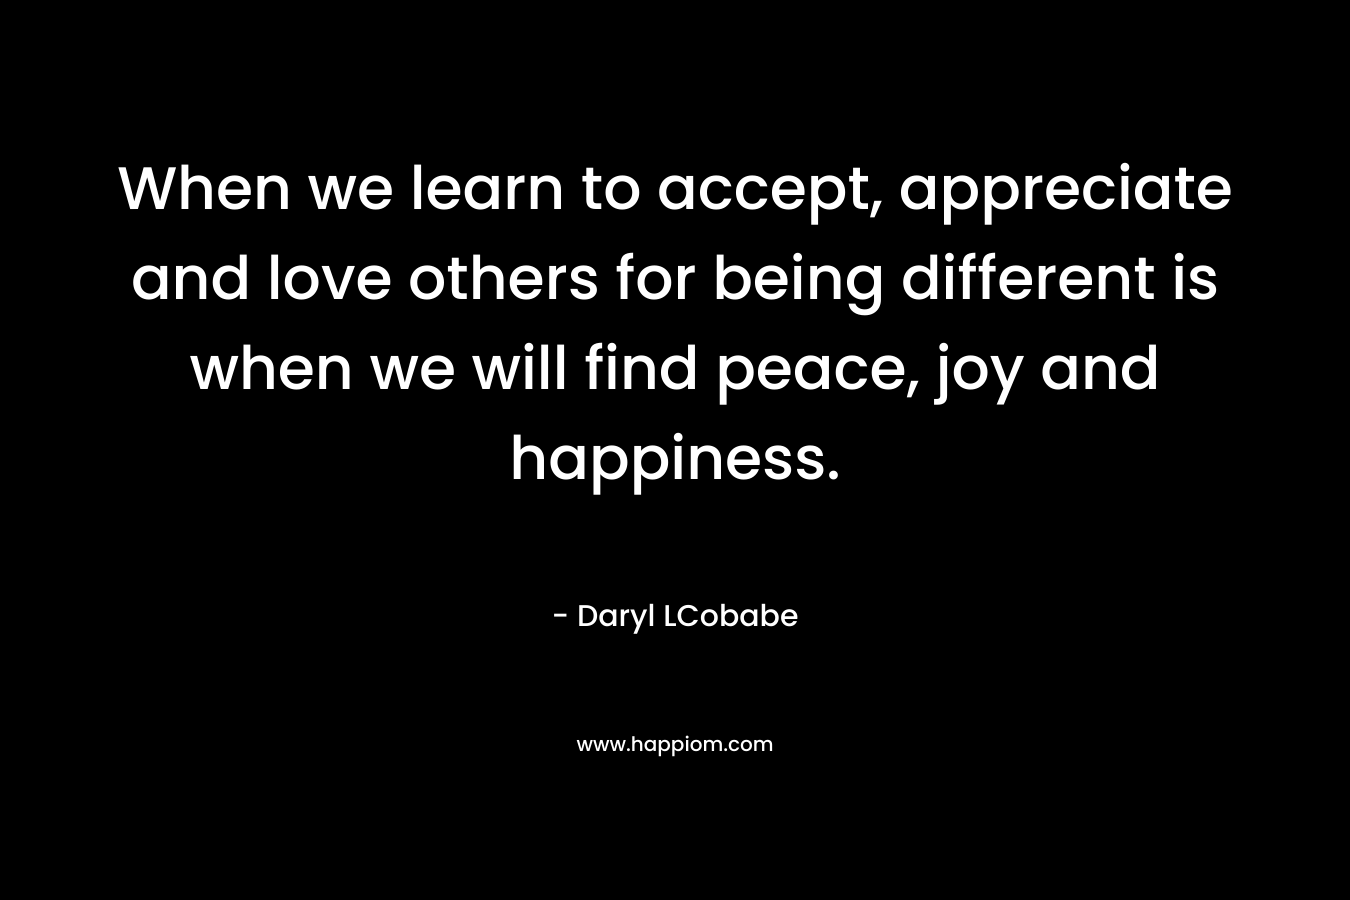 When we learn to accept, appreciate and love others for being different is when we will find peace, joy and happiness.